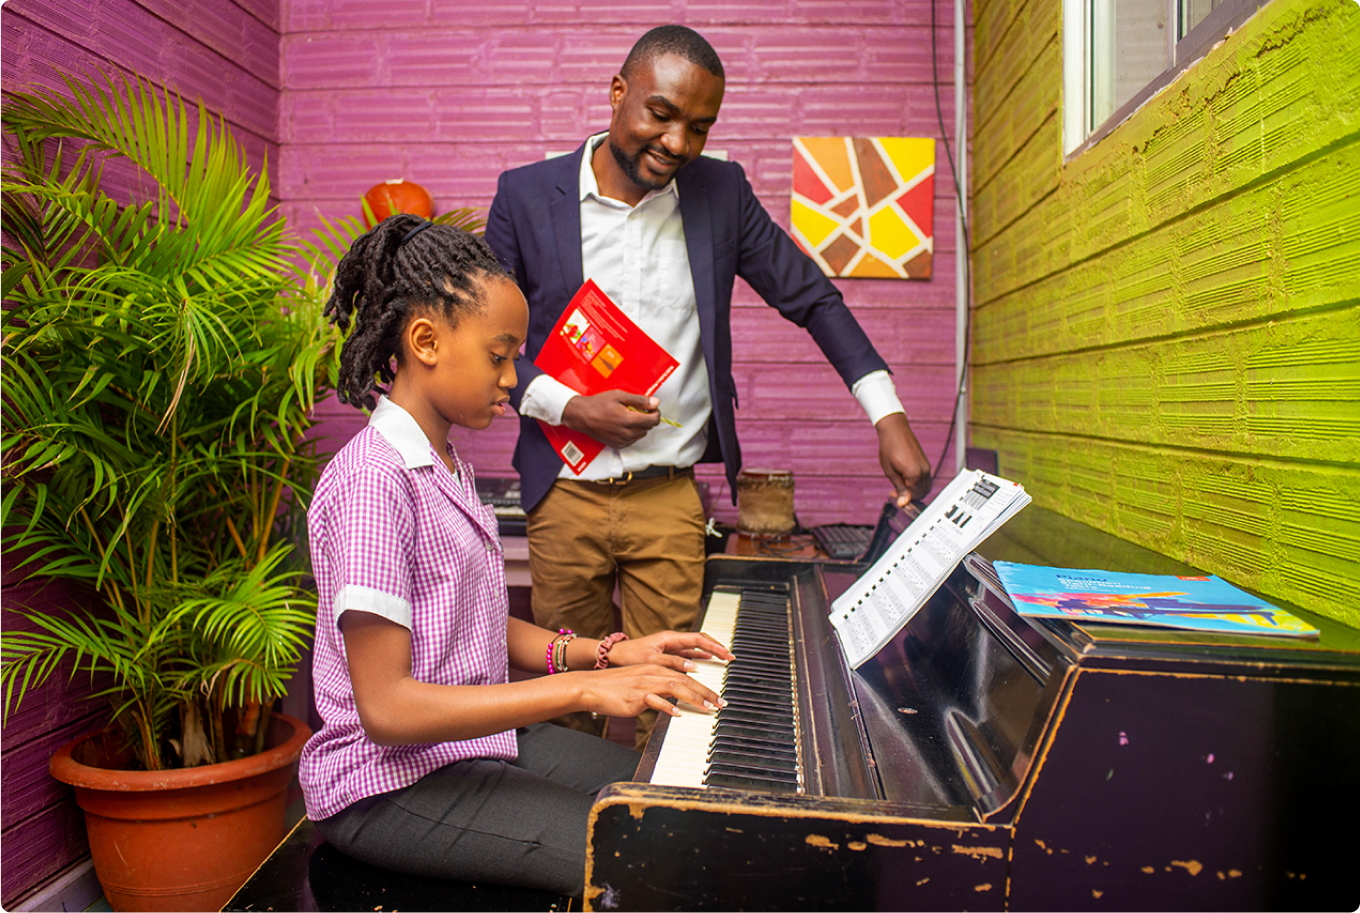 Riara primary school pupil playing keyboard with teacher supervision